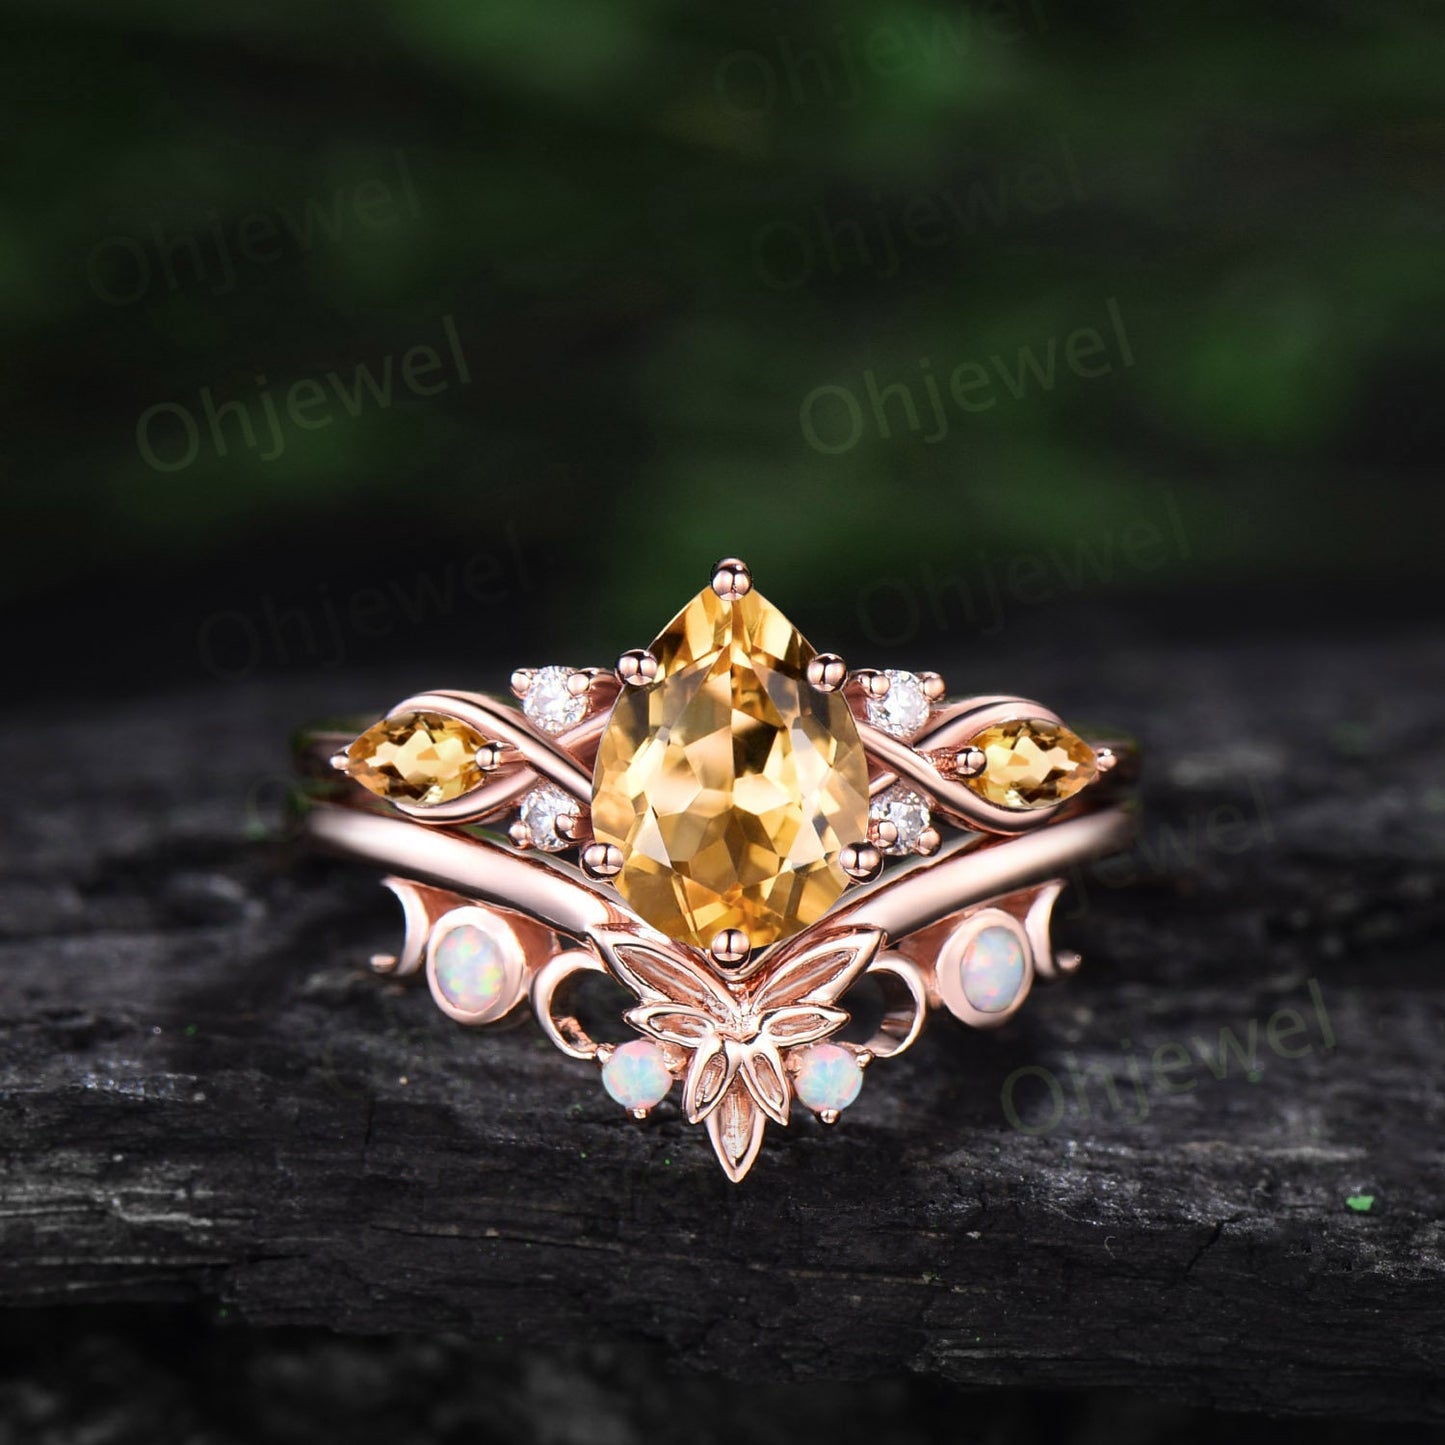 Pear shaped citrine ring vintage unique engagement ring art deco 14k yellow gold leaf opal ring women twisted wedding promise ring set gift